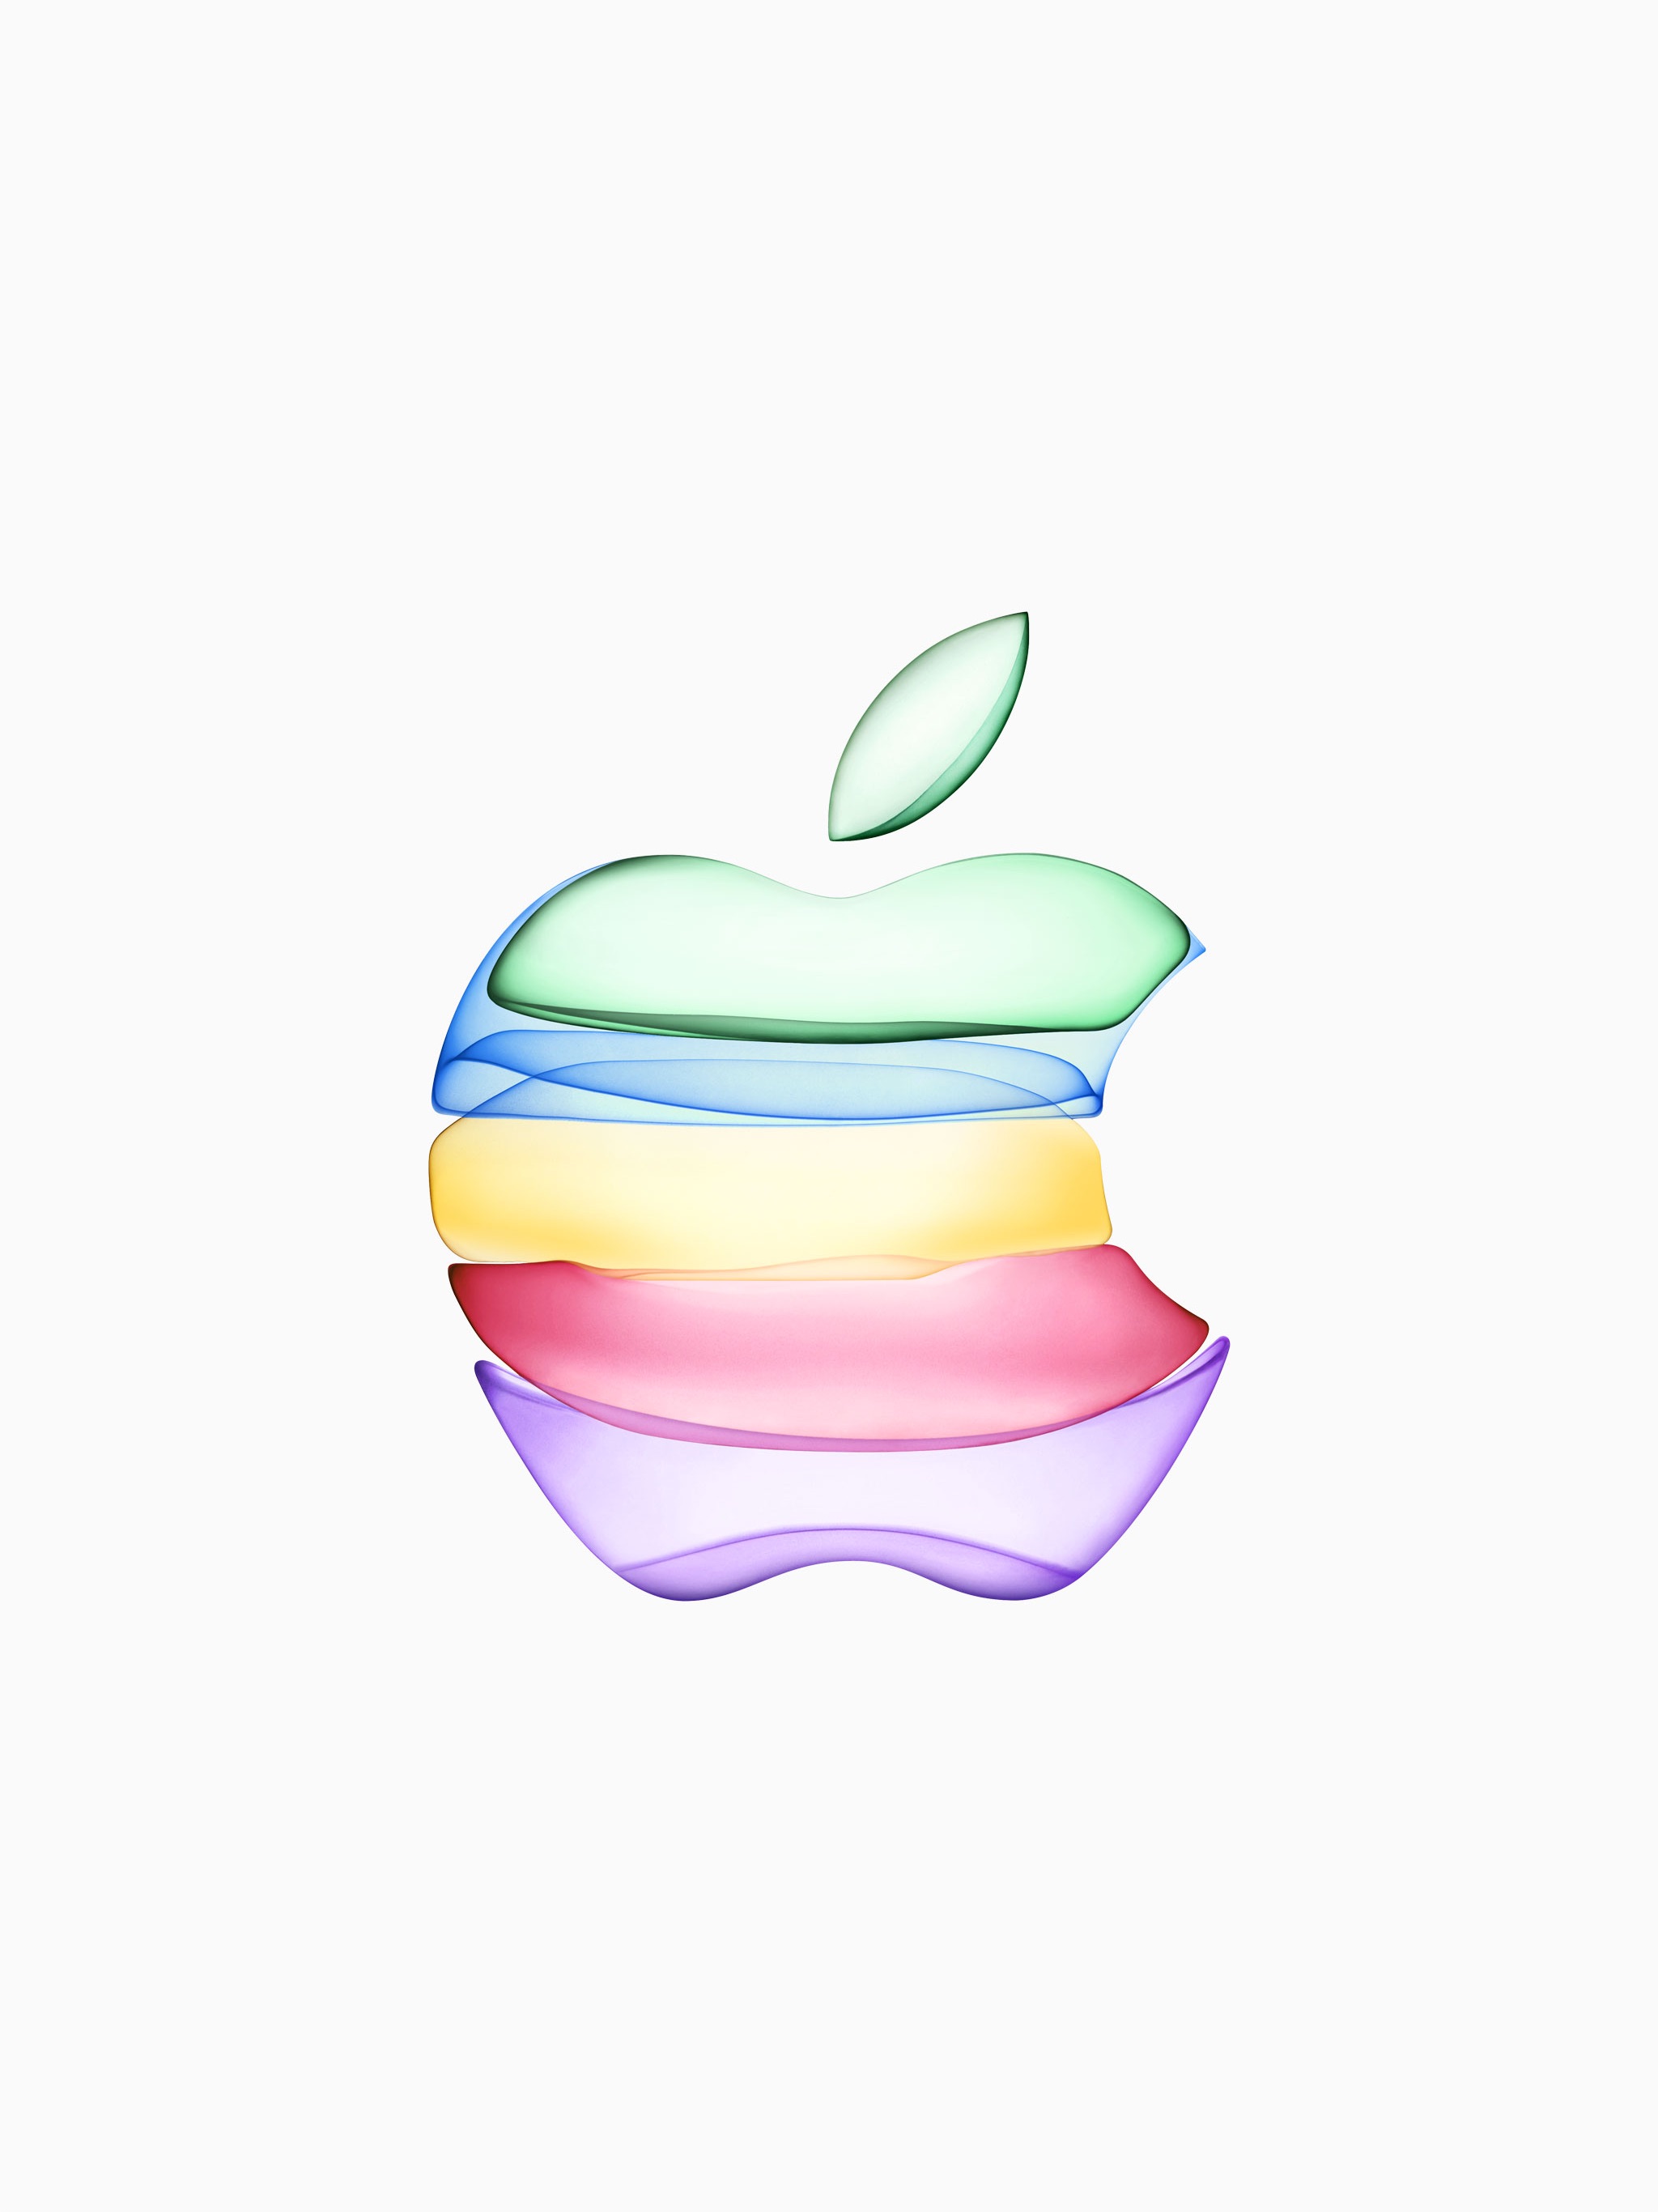 Gallery 10 Awesome Apple Logo Wallpapers  Cult of Mac